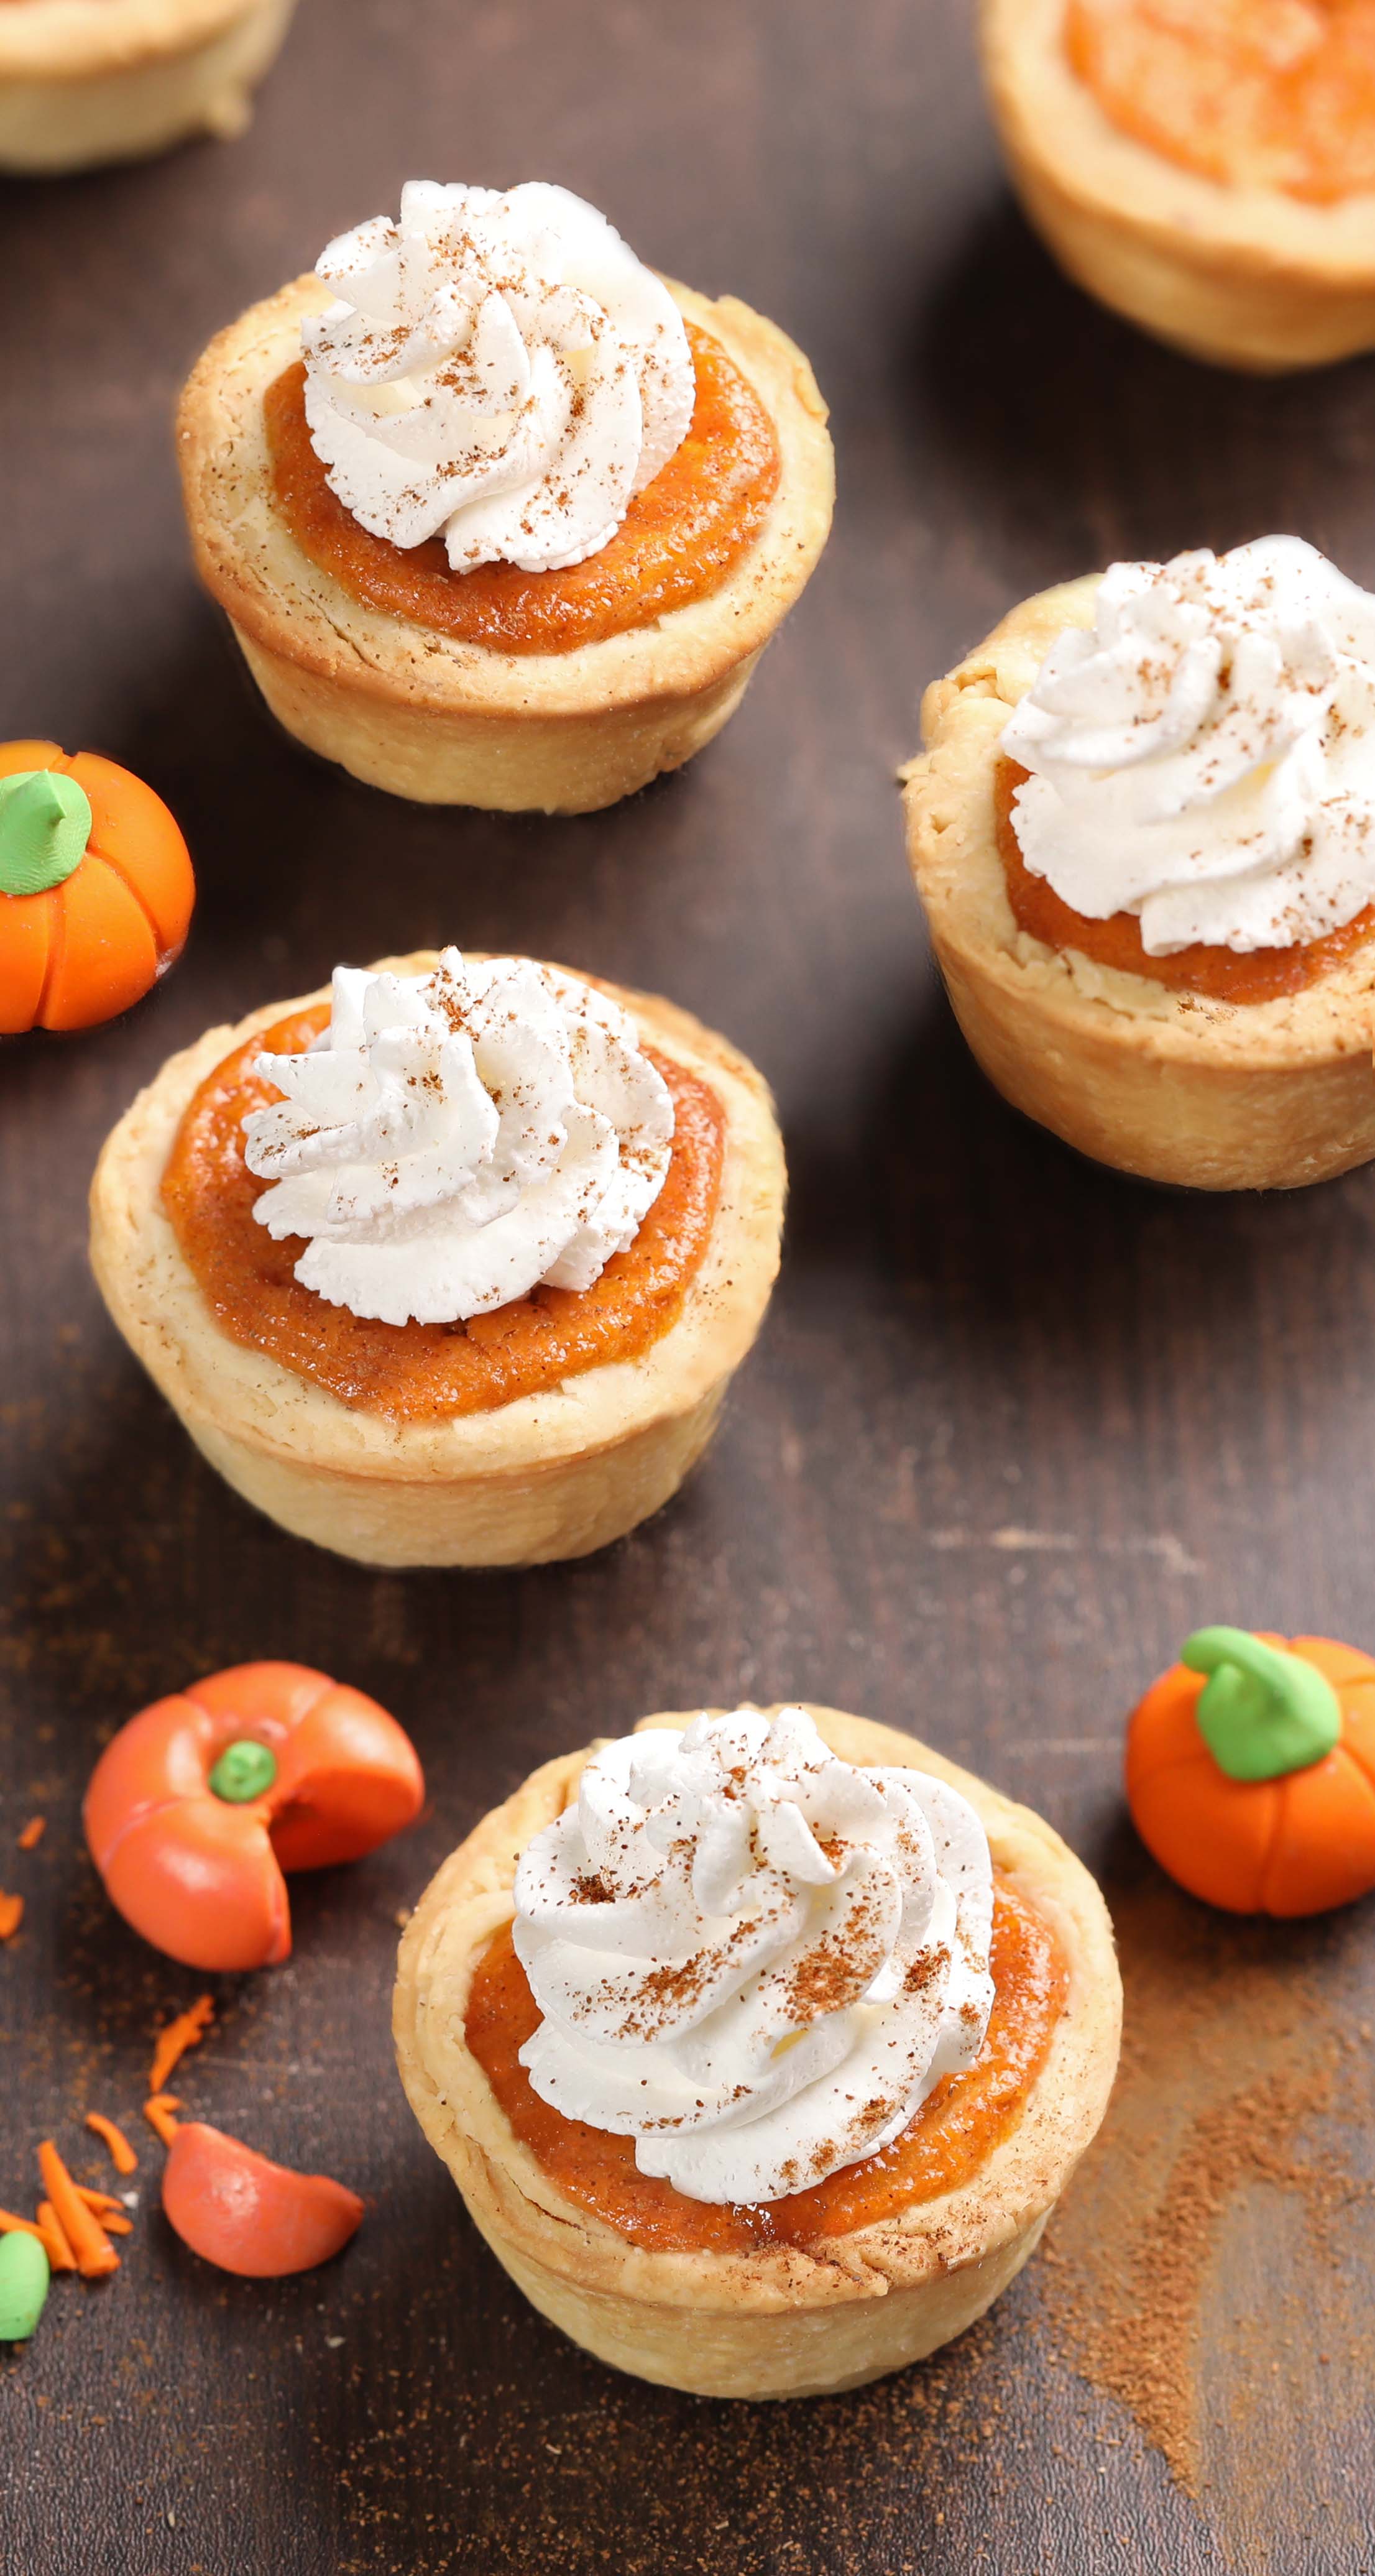 An easy recipe for mini pumpkin pies made in a muffin pan. The perfect dessert for Thanksgiving!